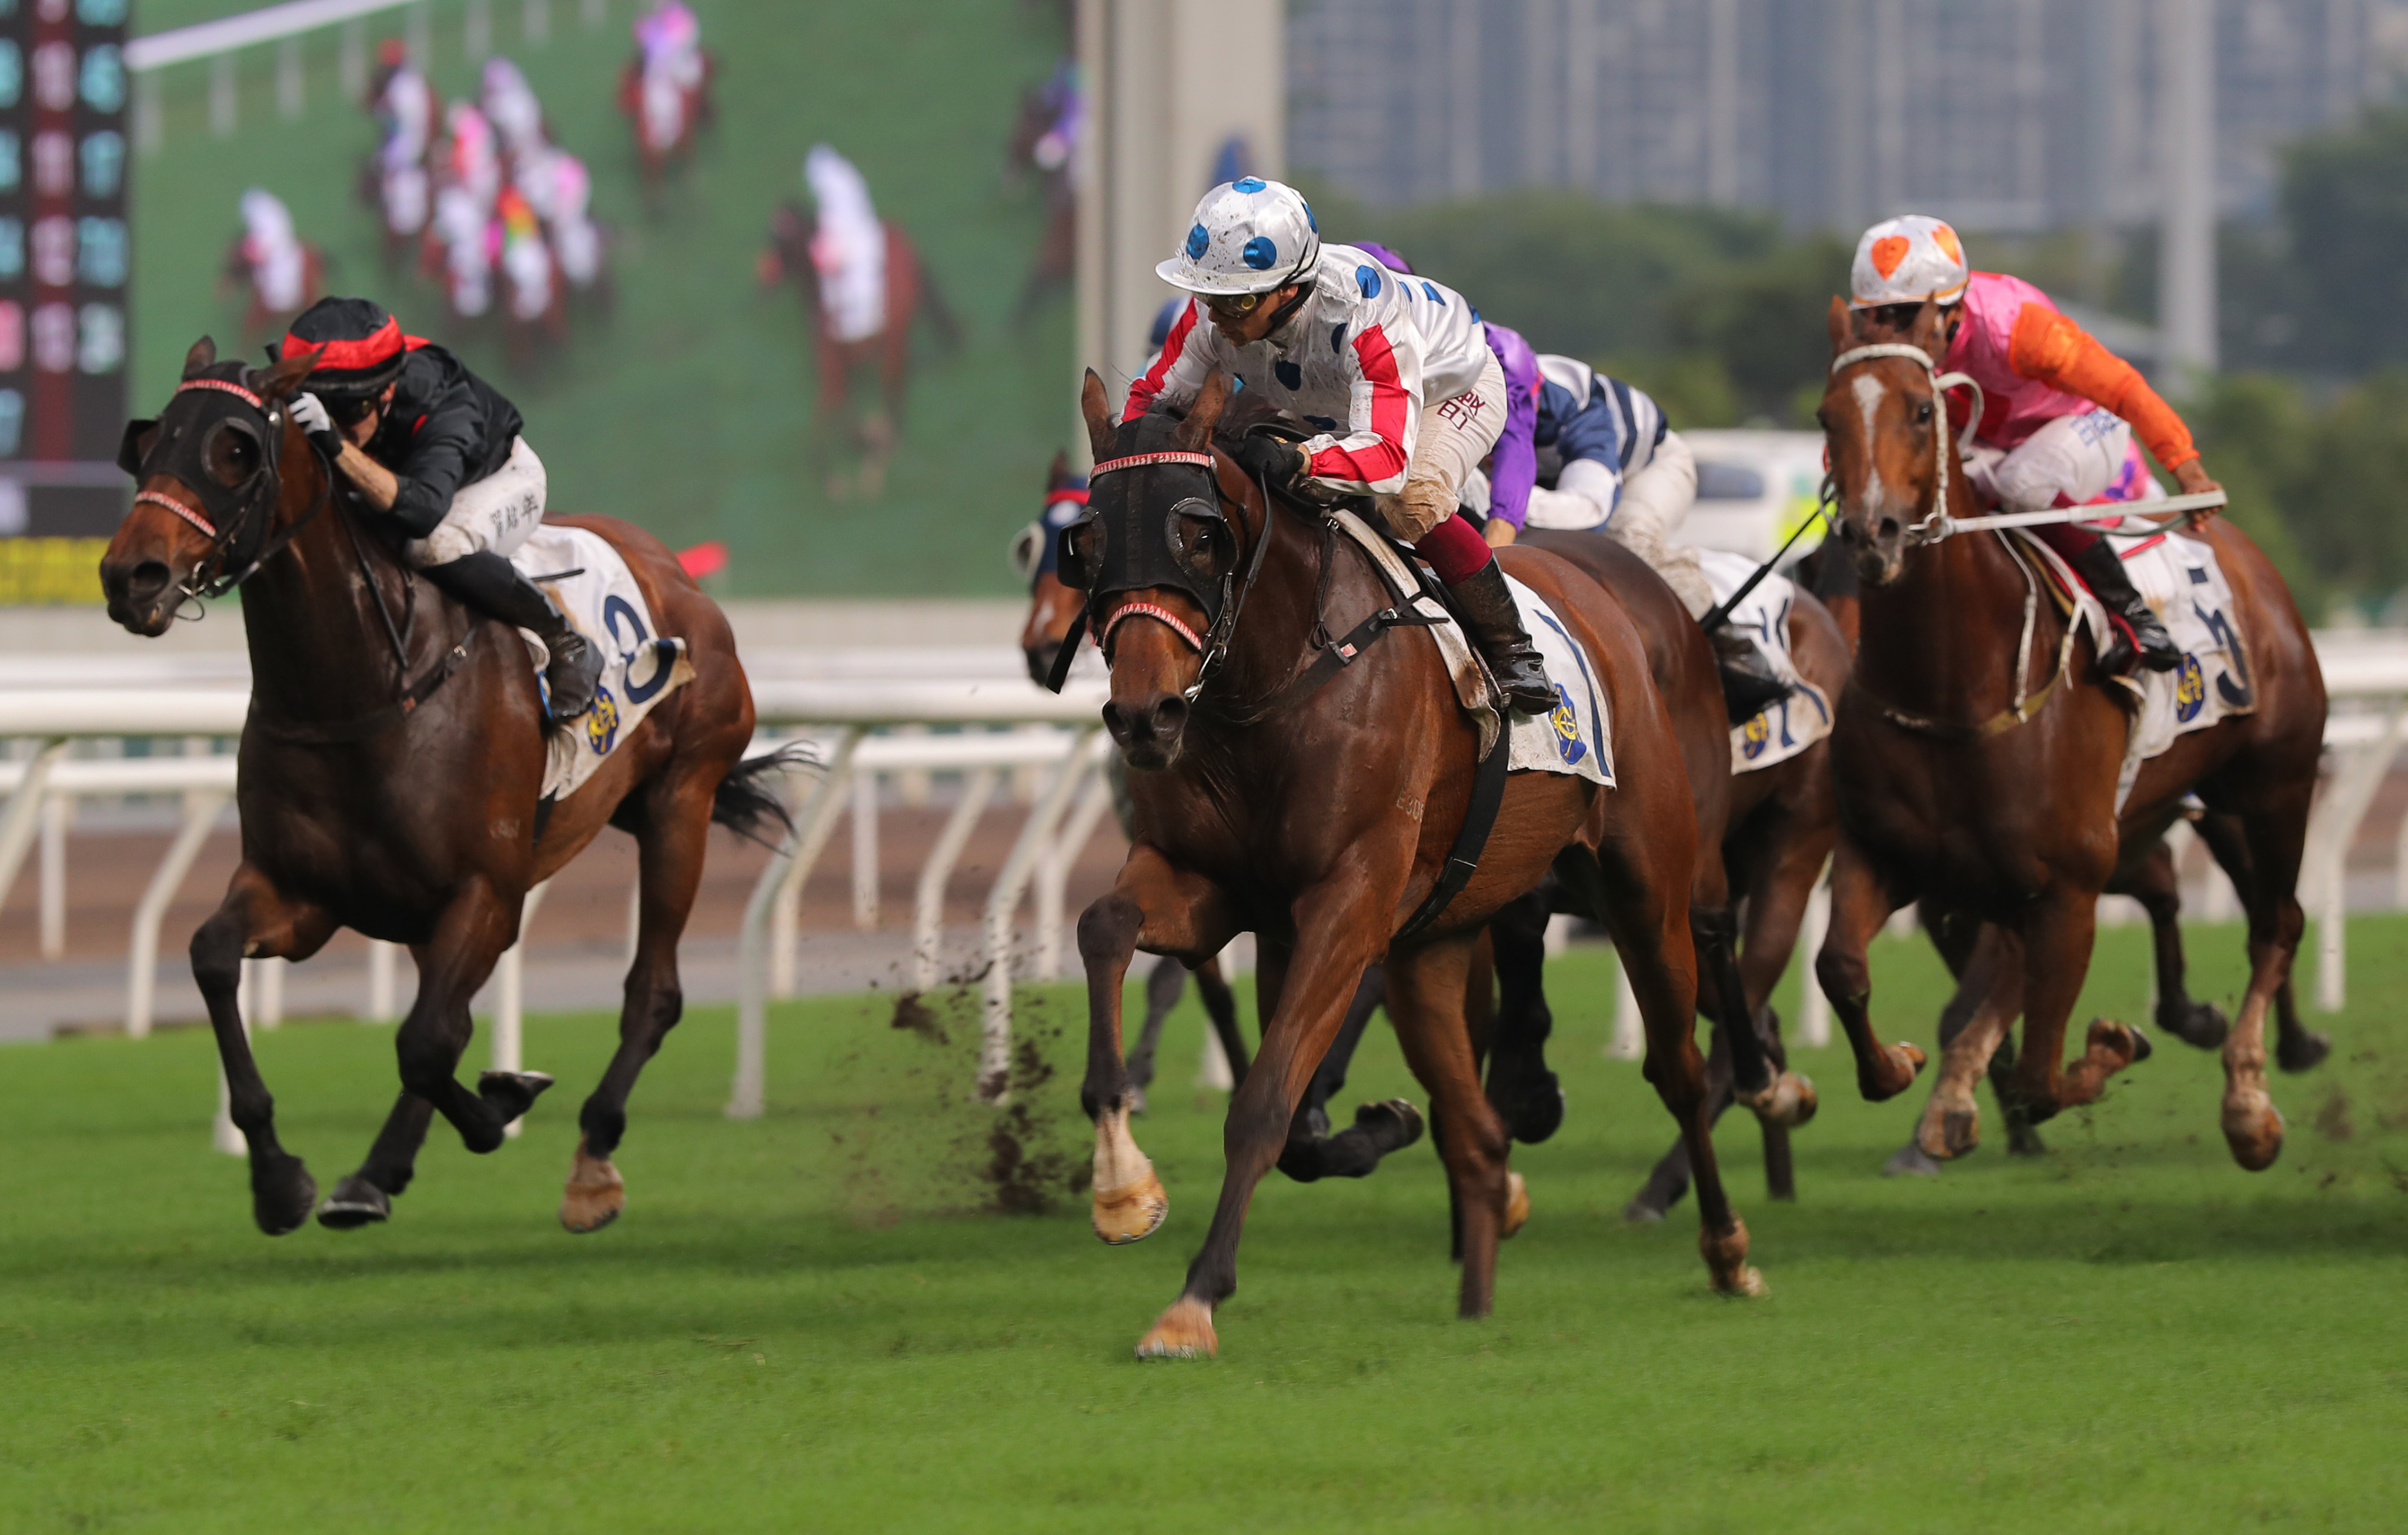 C P Brave storms home under Alexis Badel to win at Sha Tin. Photos: Kenneth Chan